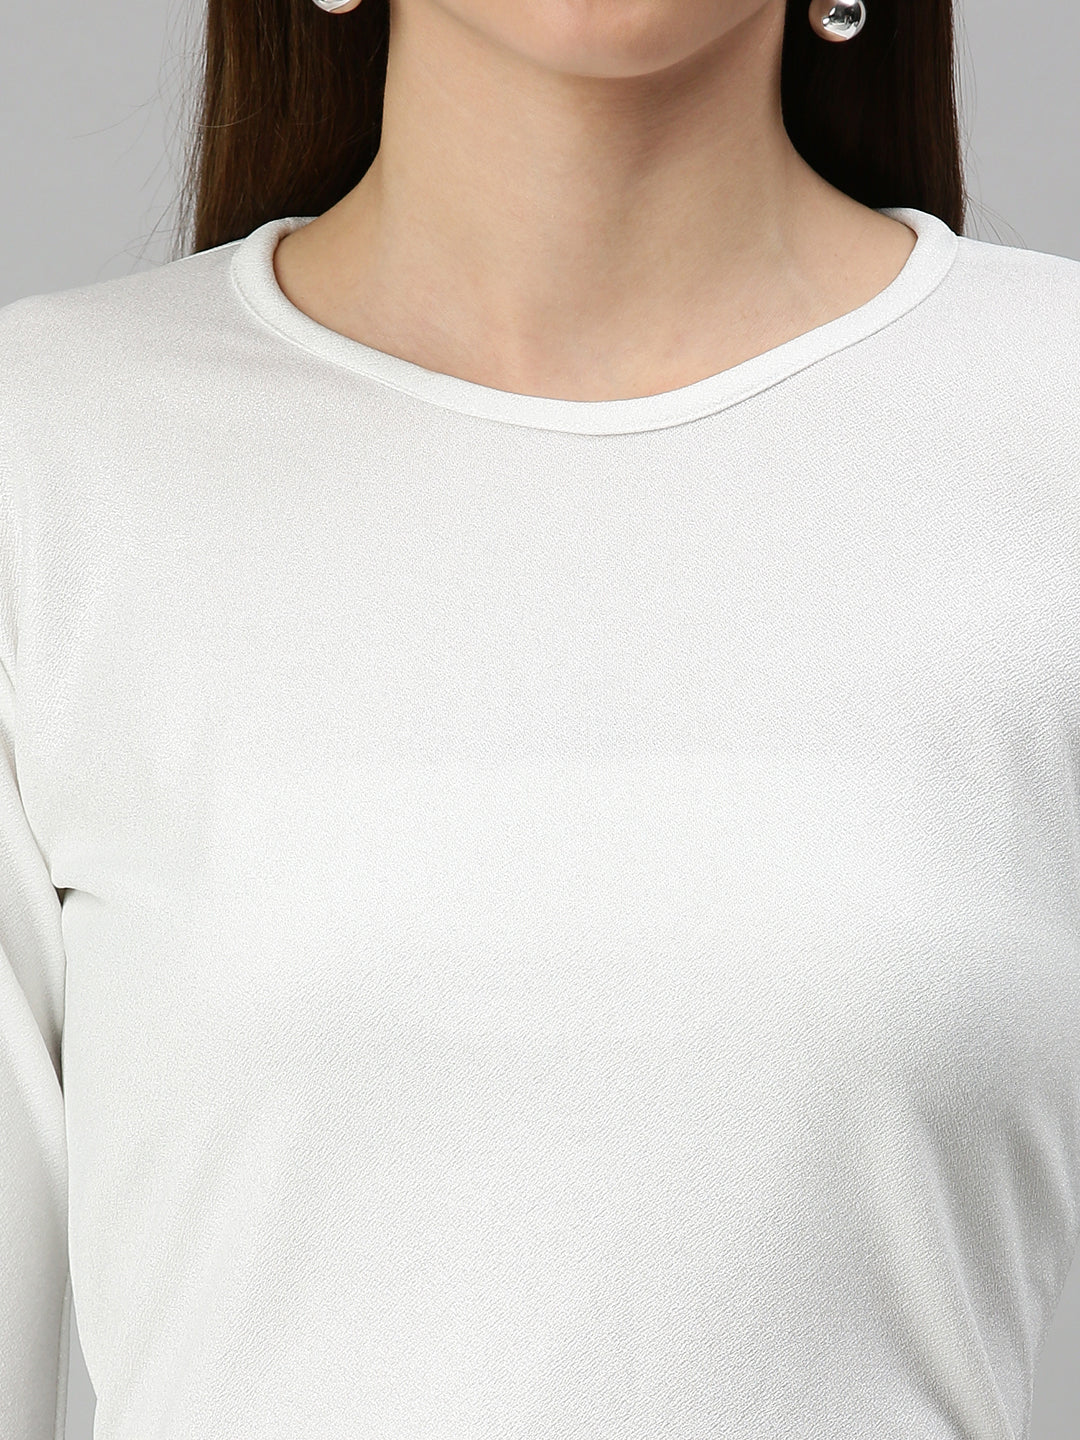 Women's White Solid Tops